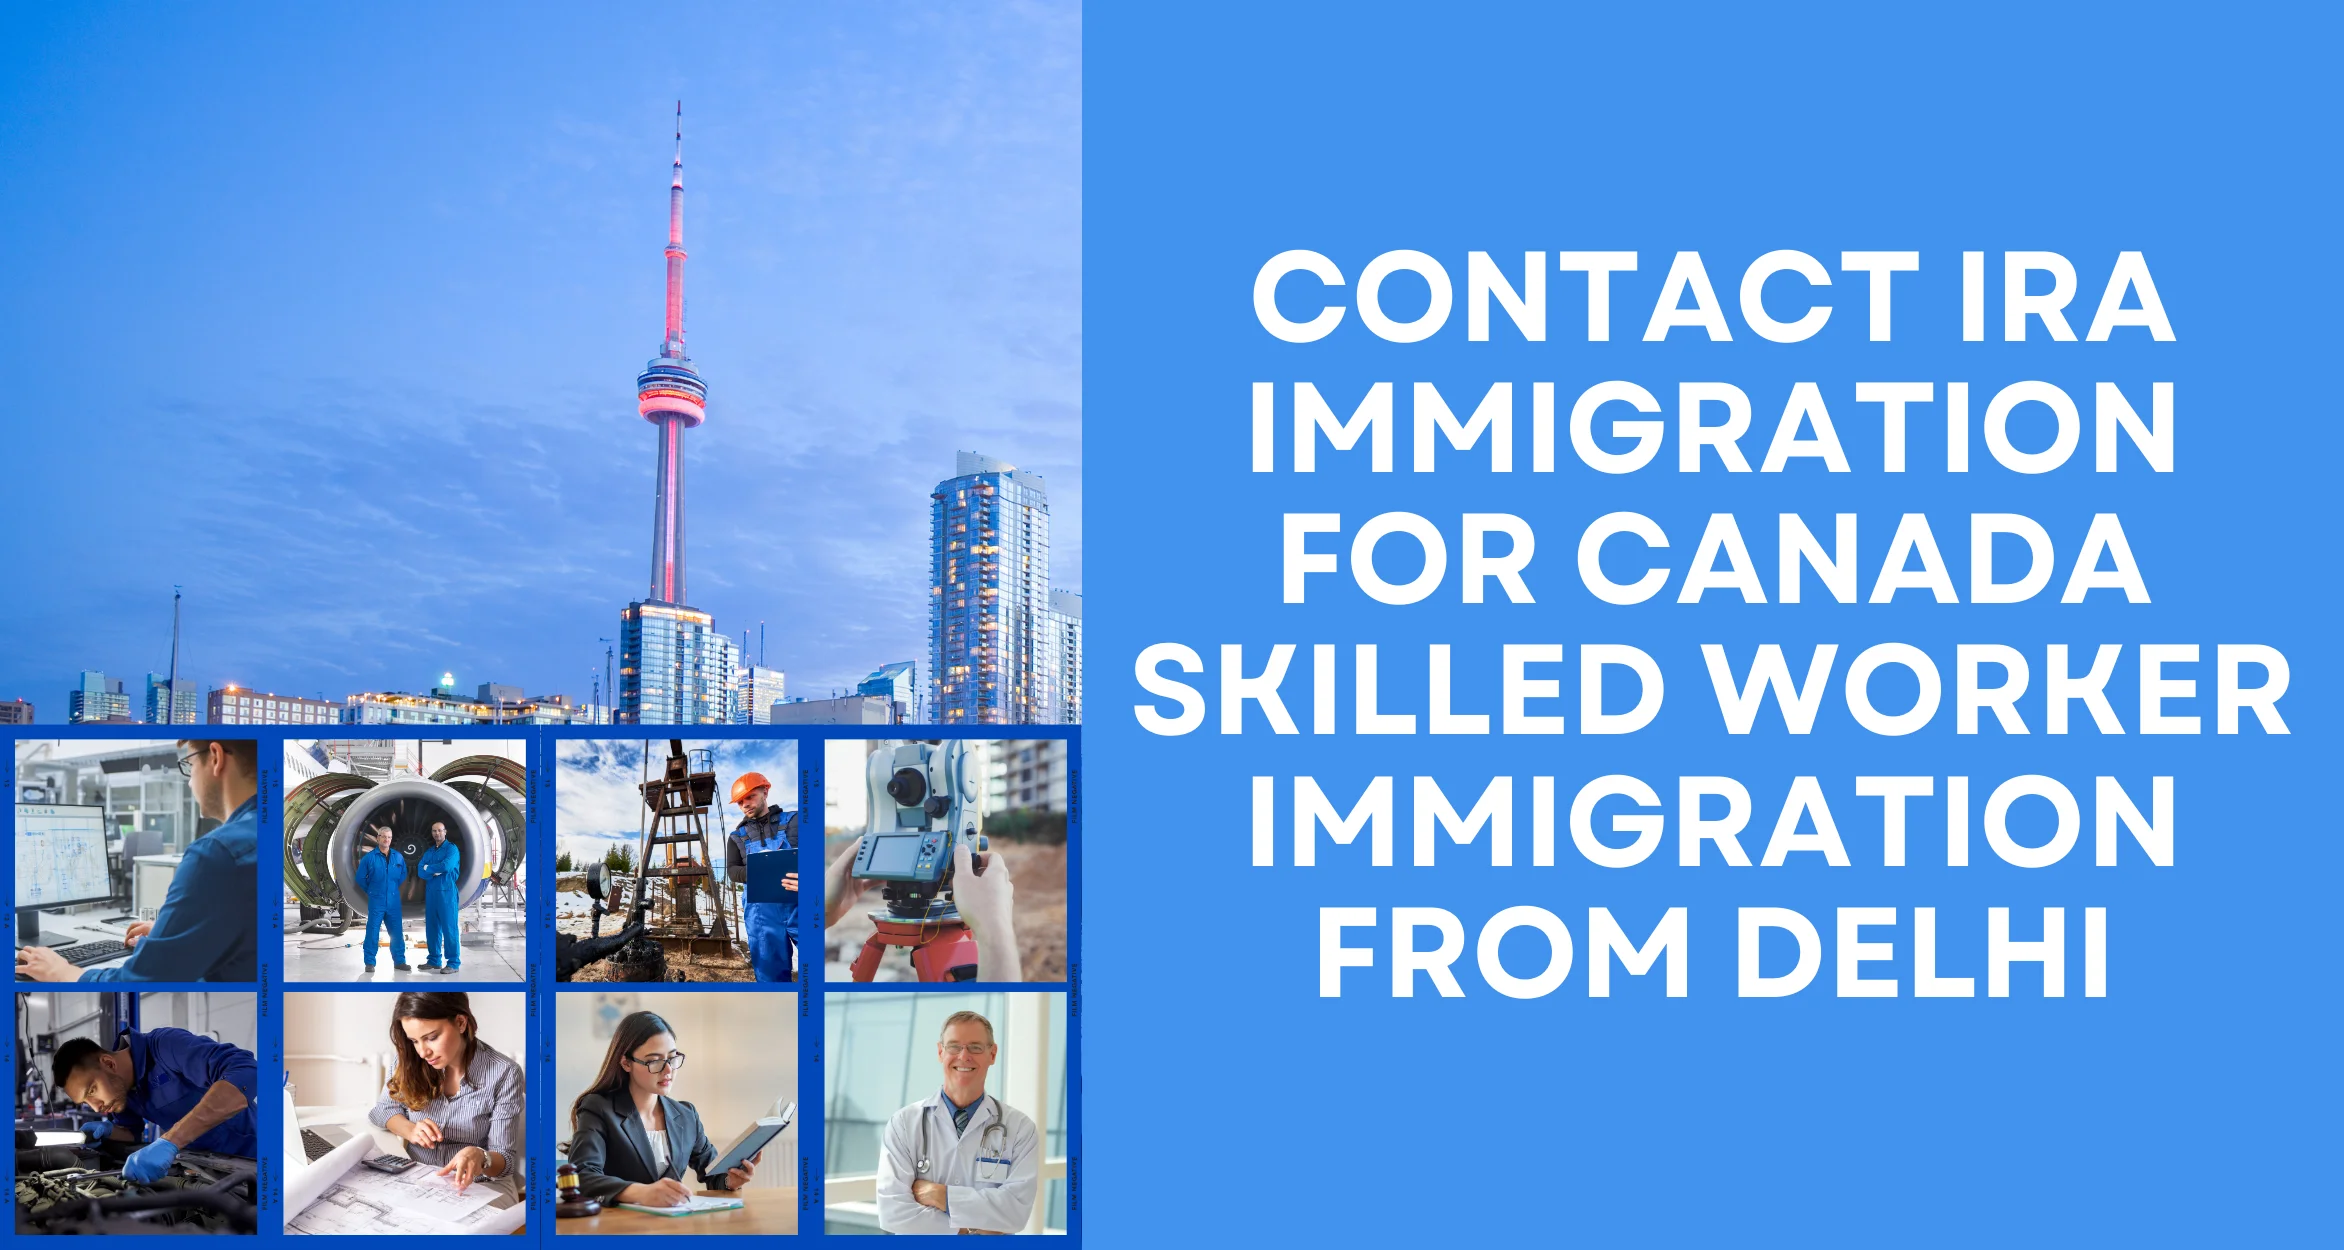 Contact IRA Immigration for Canada skilled worker Immigration from Delhi